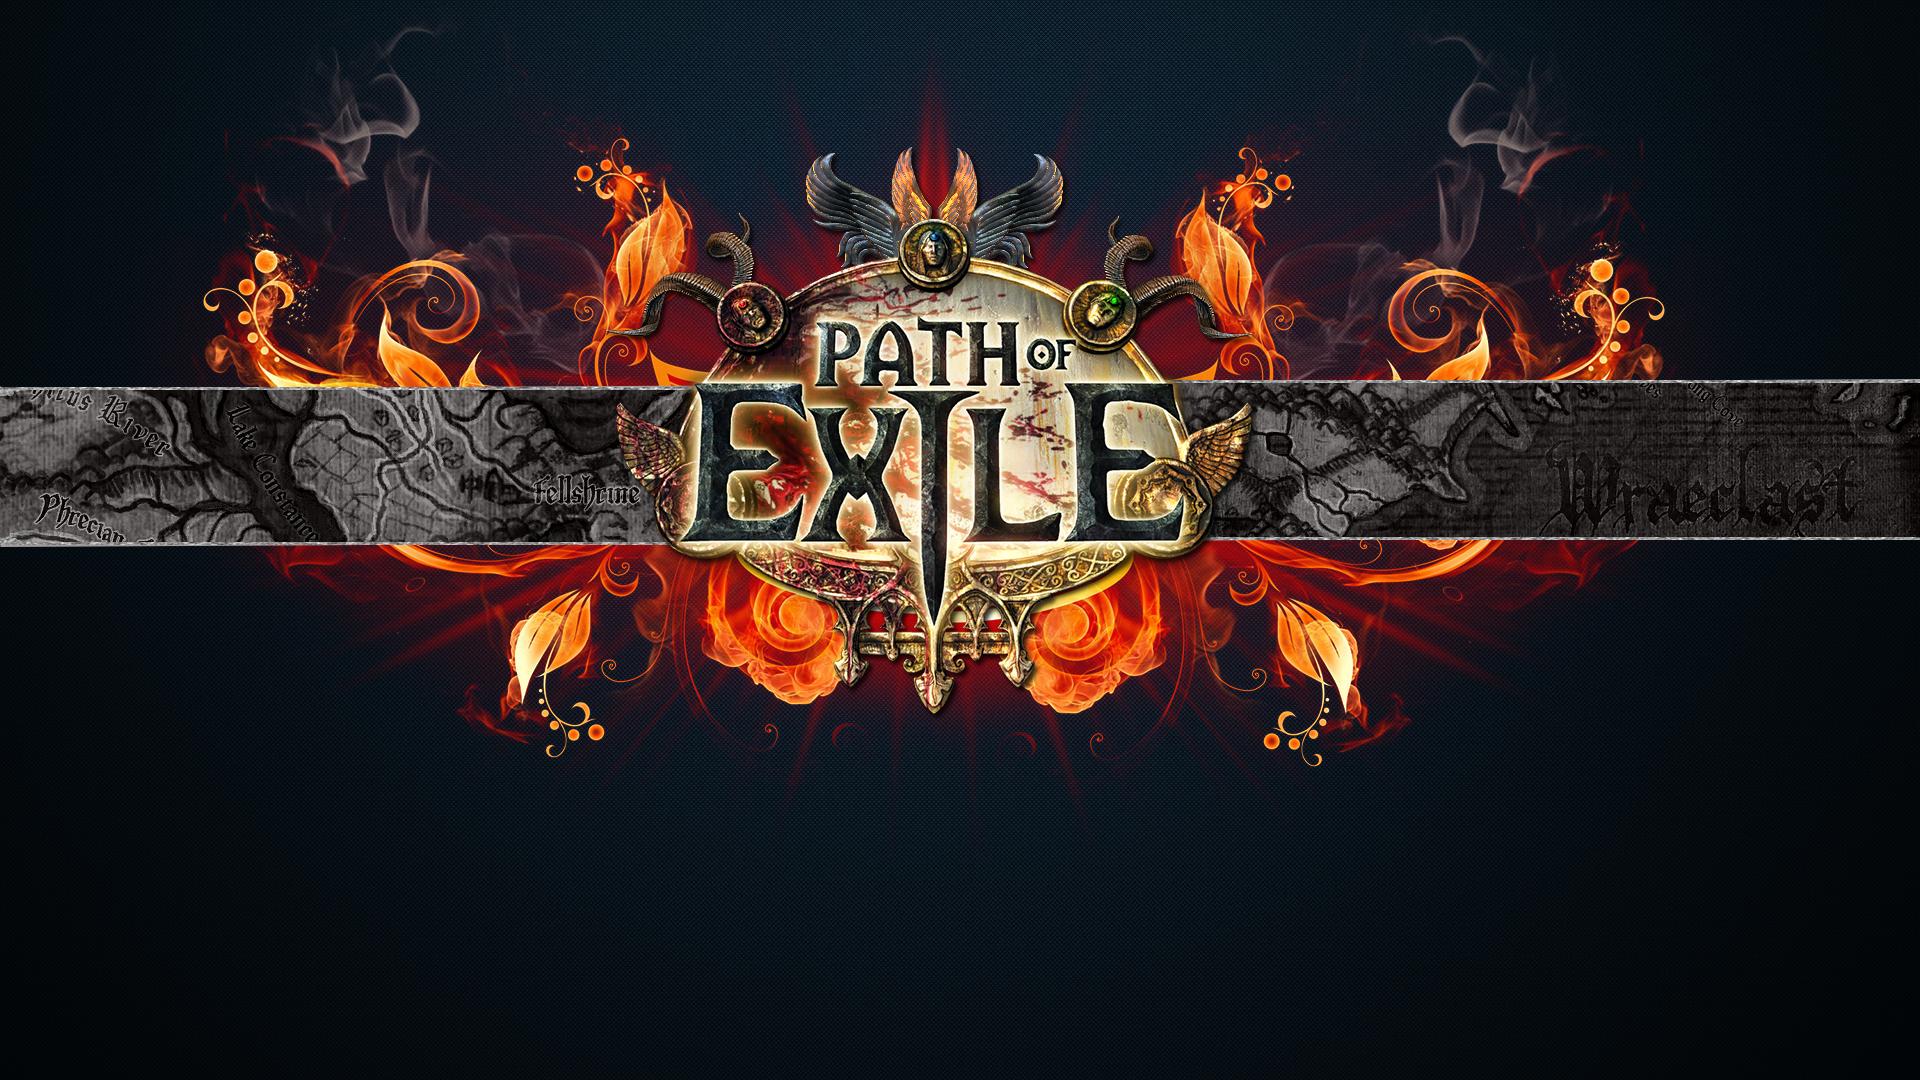 path of exile, video game, mmorpg